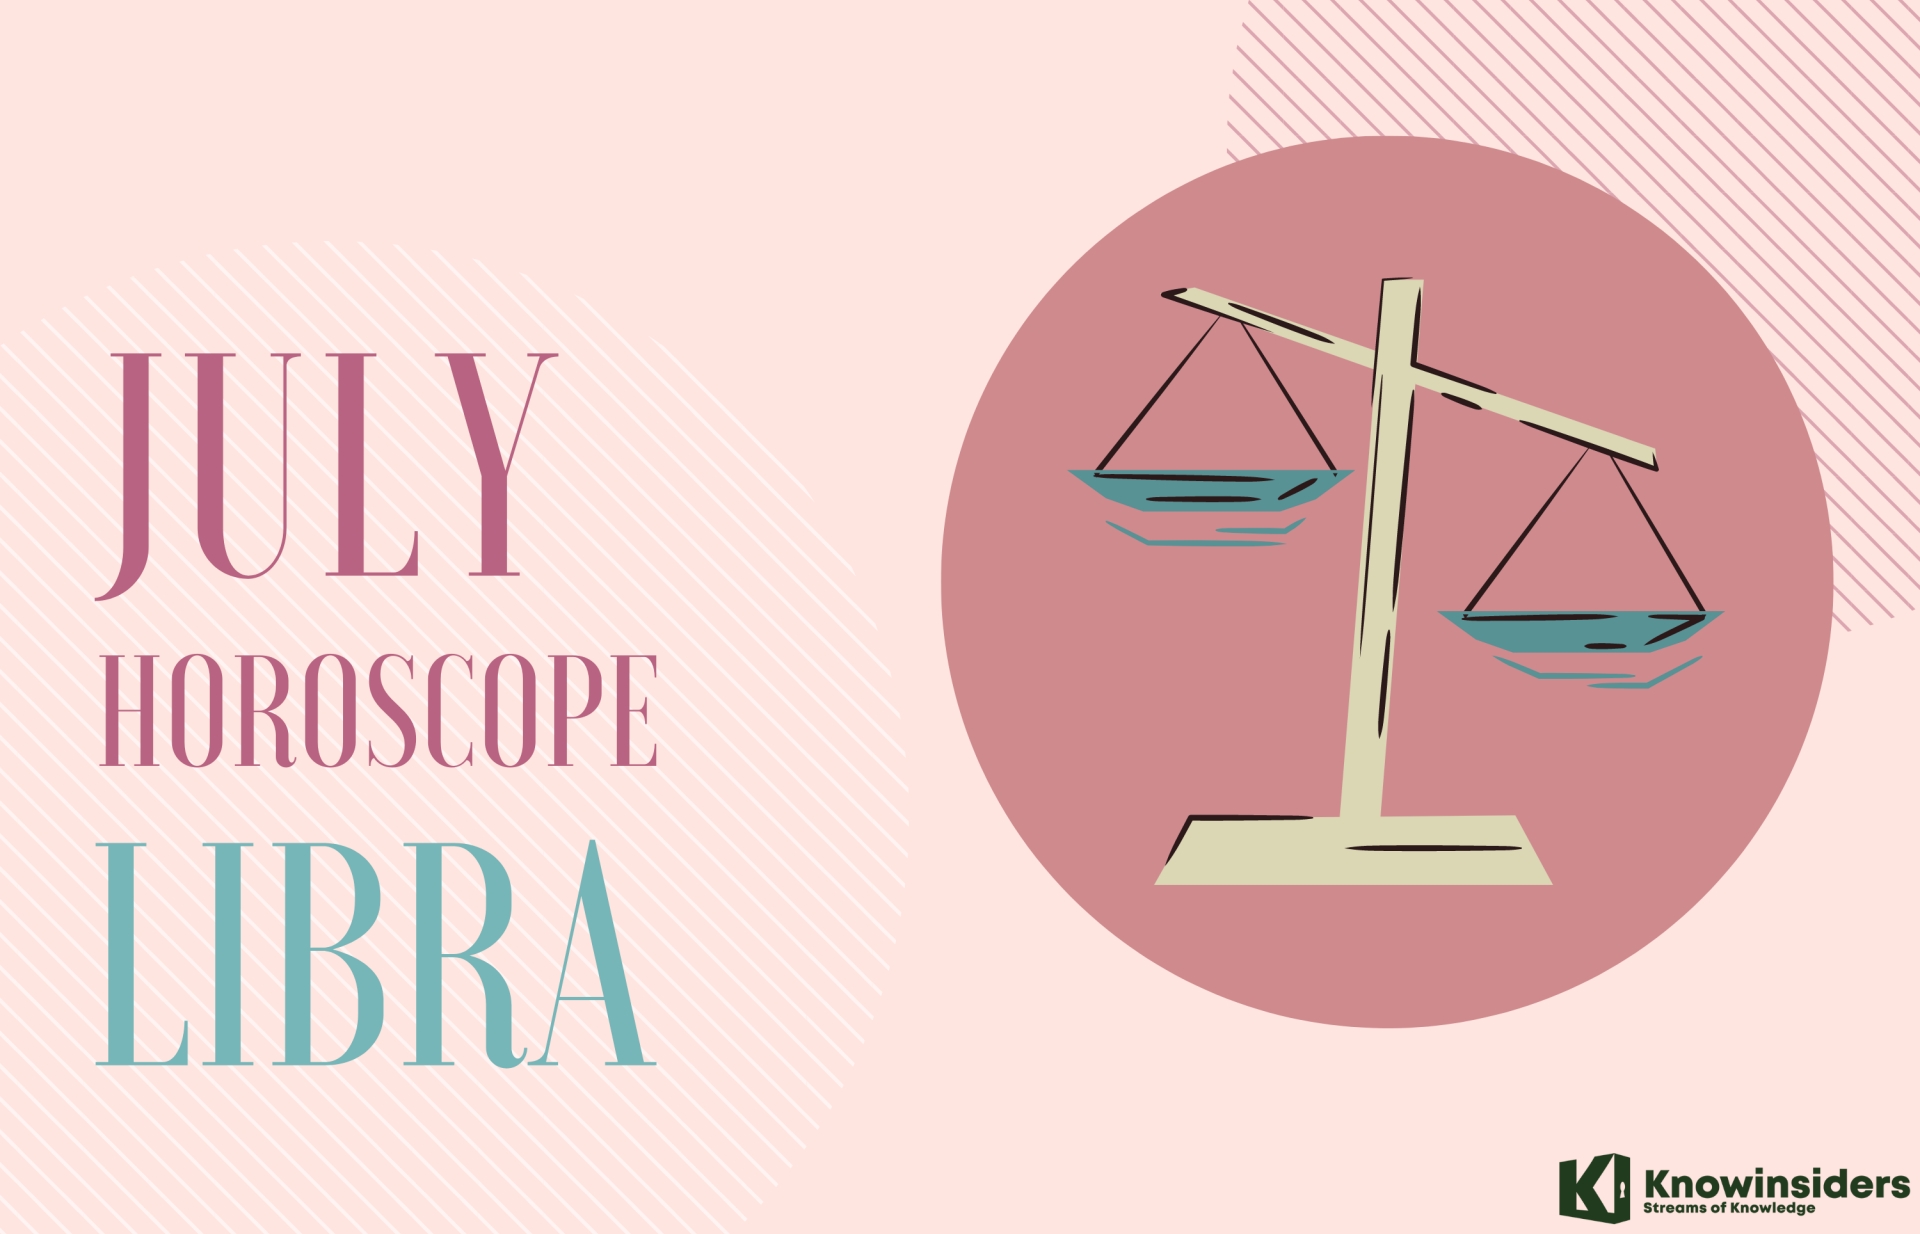 LIBRA July 2022 Horoscope: Monthly Prediction for Love, Career, Money and Health